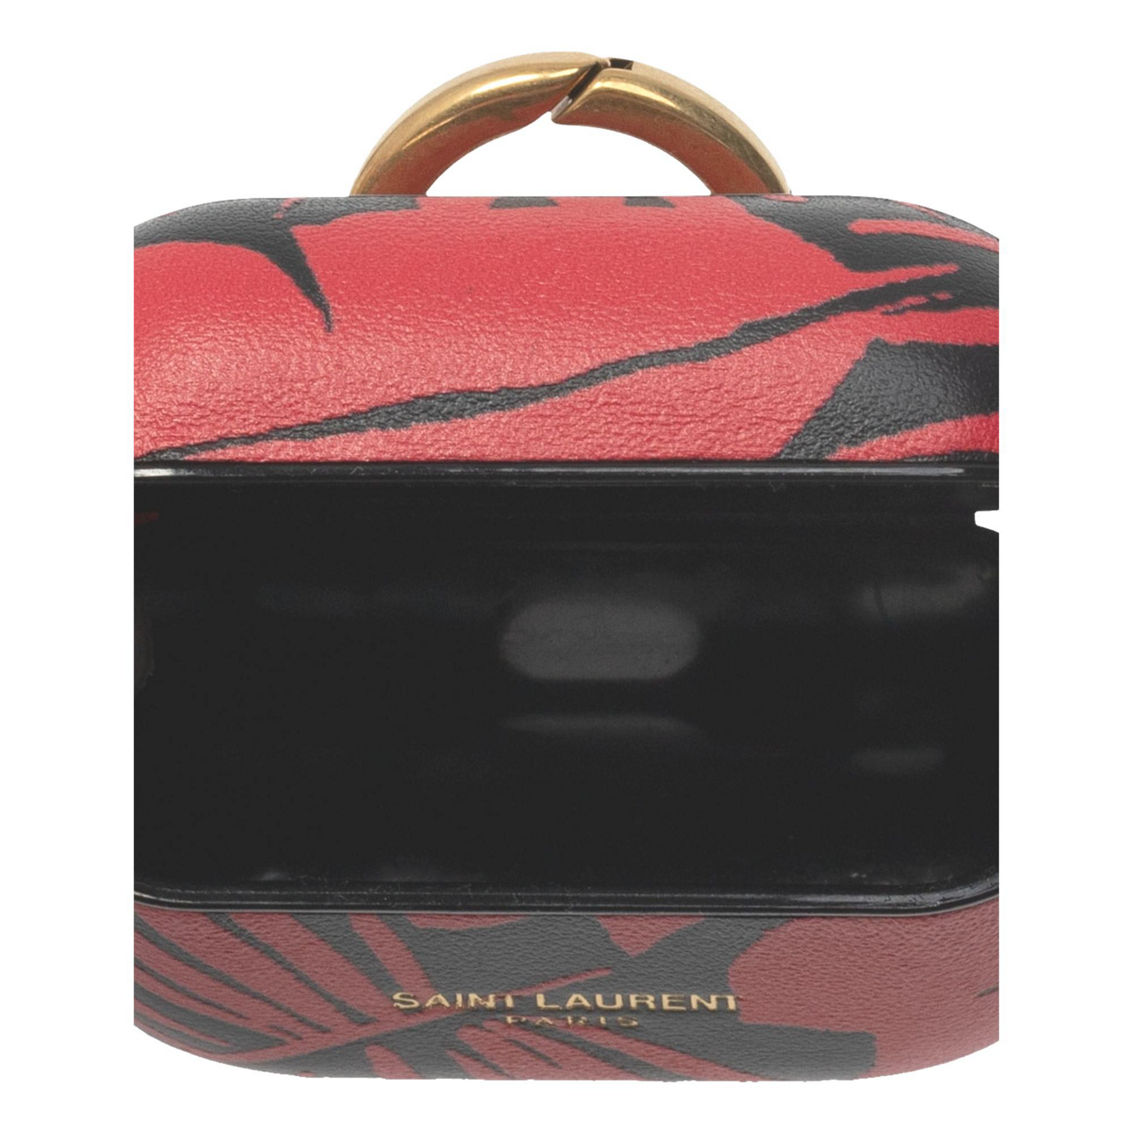 Saint Laurent Abstract Print Black and Red Leather Airpods Pro Case (New) - Image 3 of 4